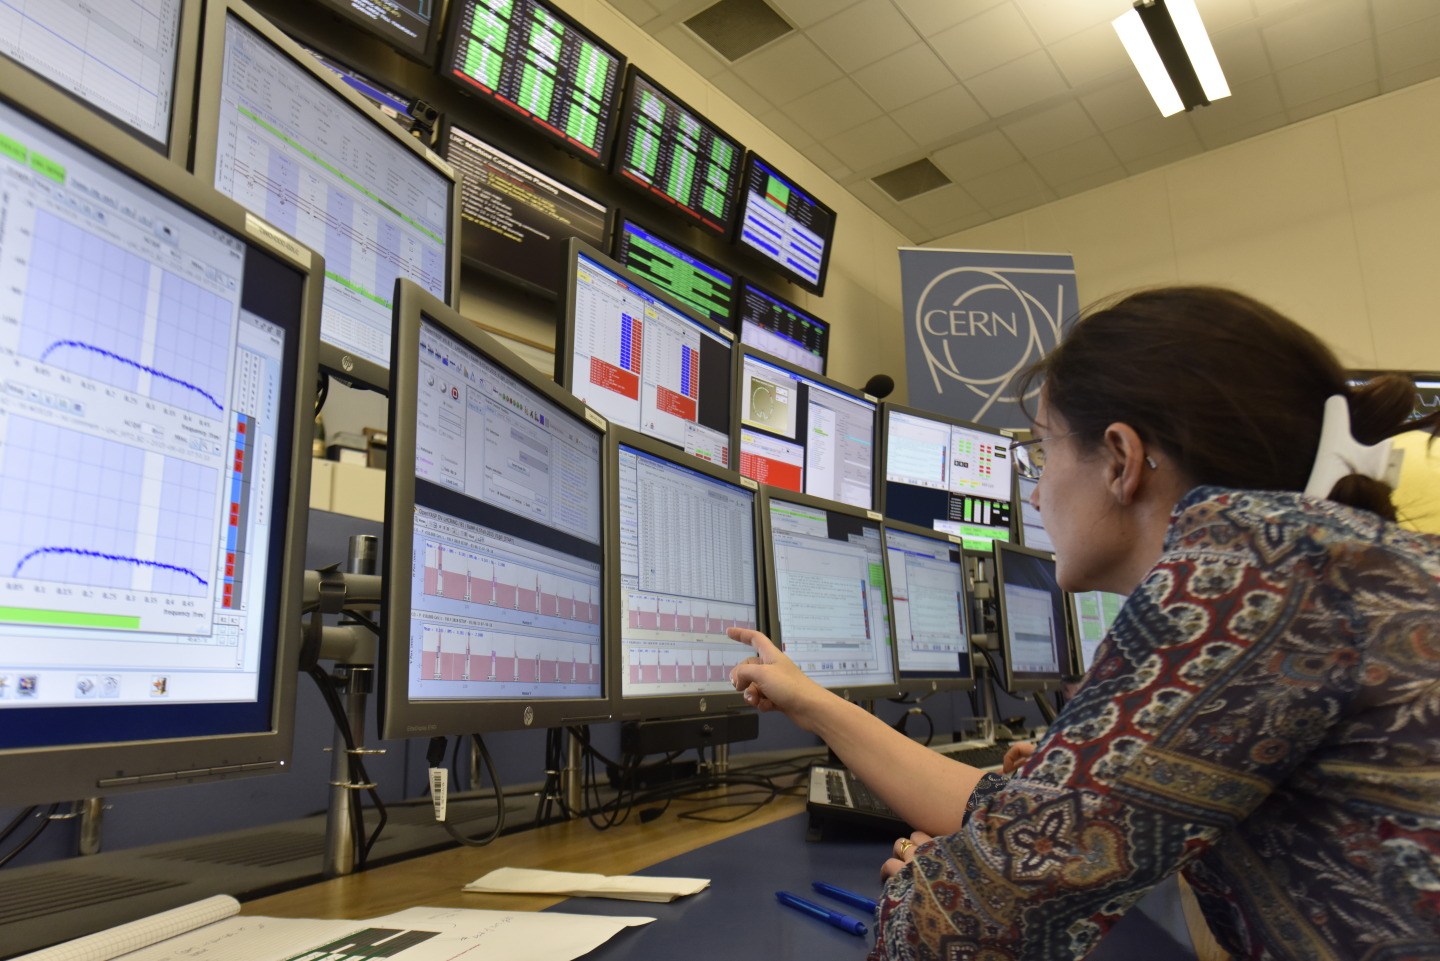 One of the LHC operators analyses the many screens of data that physicists use to monitor and operate the machine.